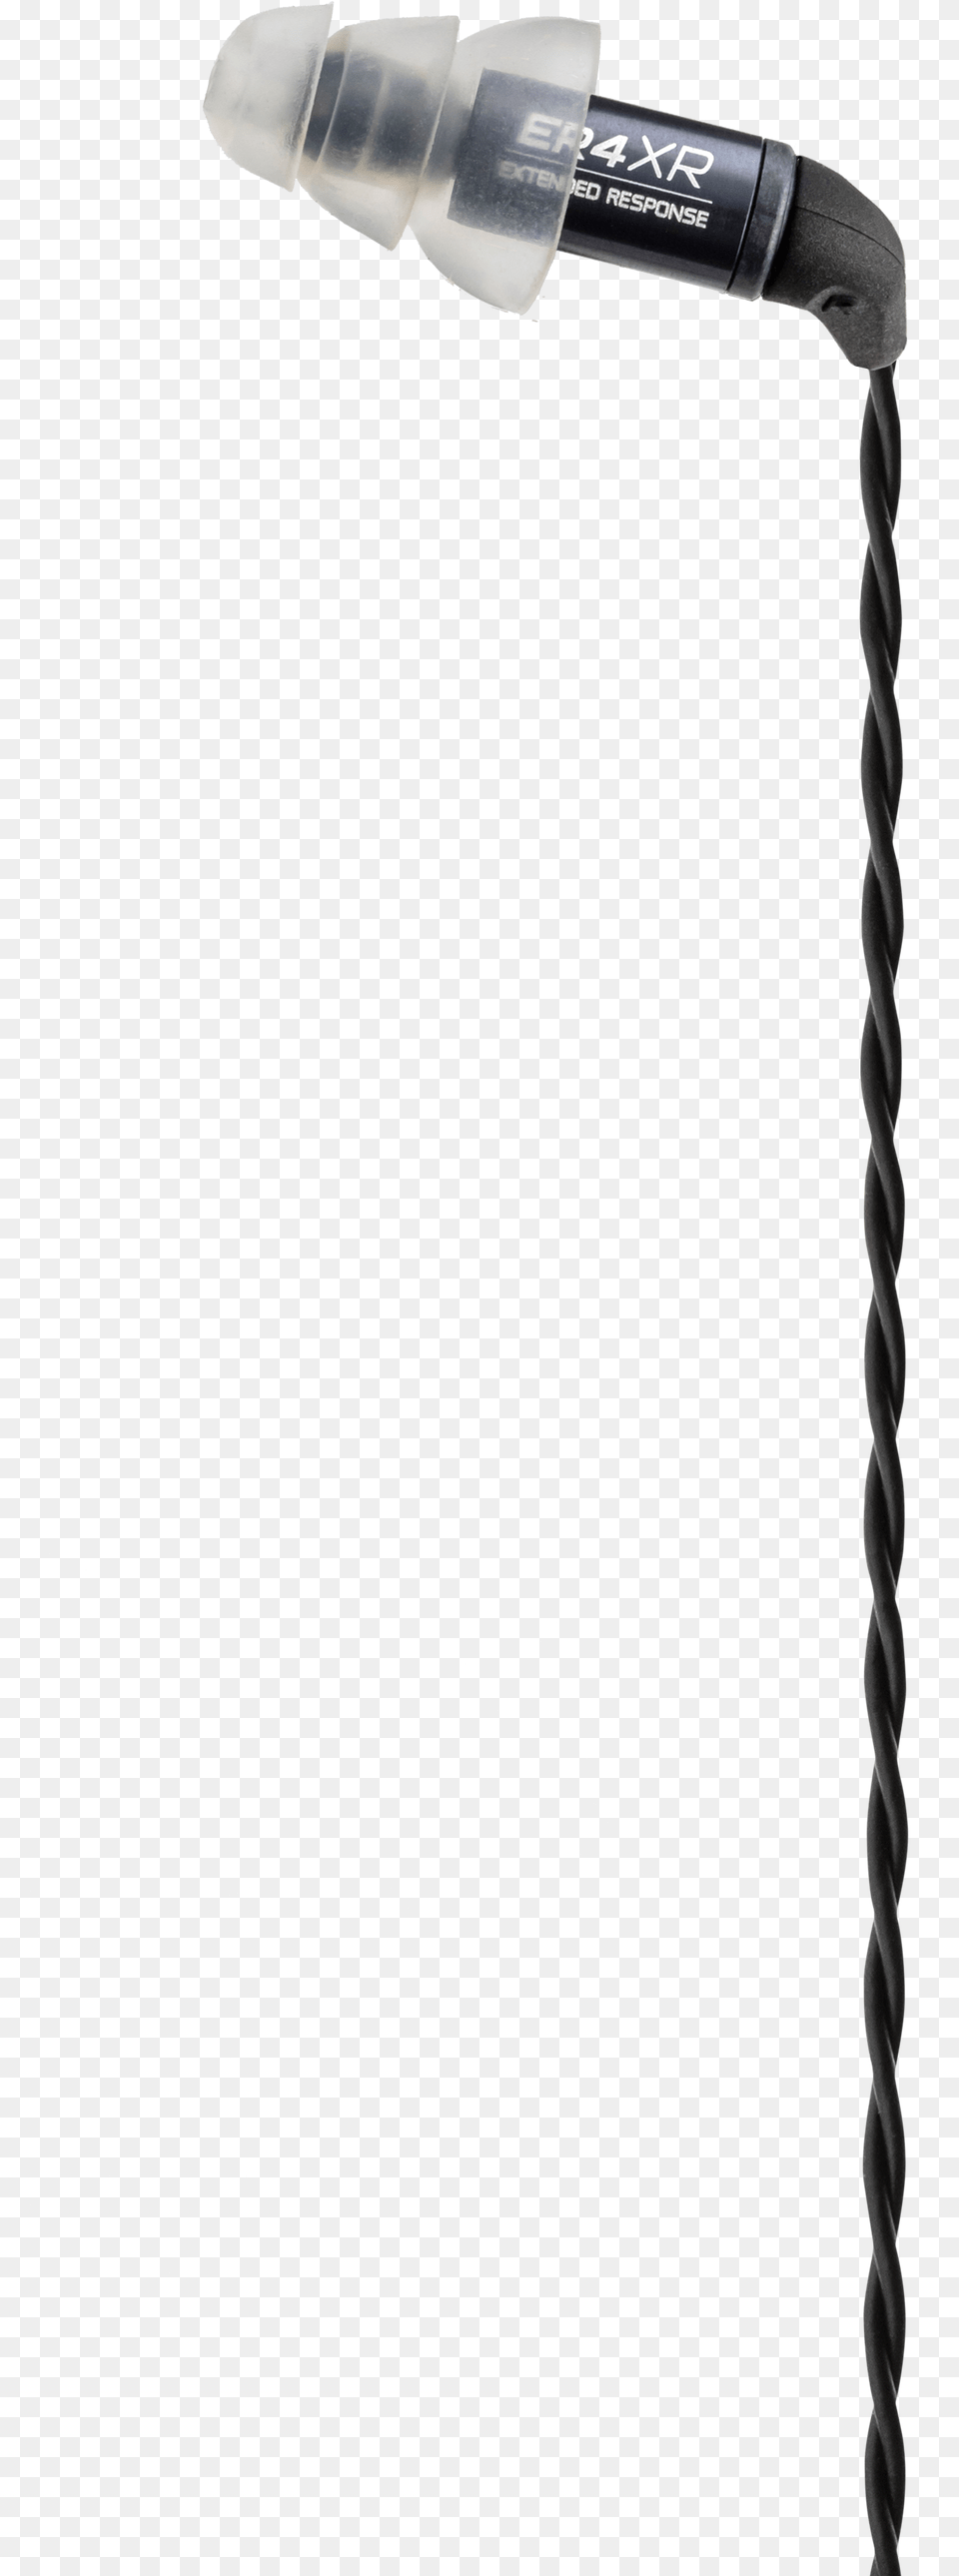 Large Tip Straight Cord, Lamp, Electrical Device, Microphone Free Png